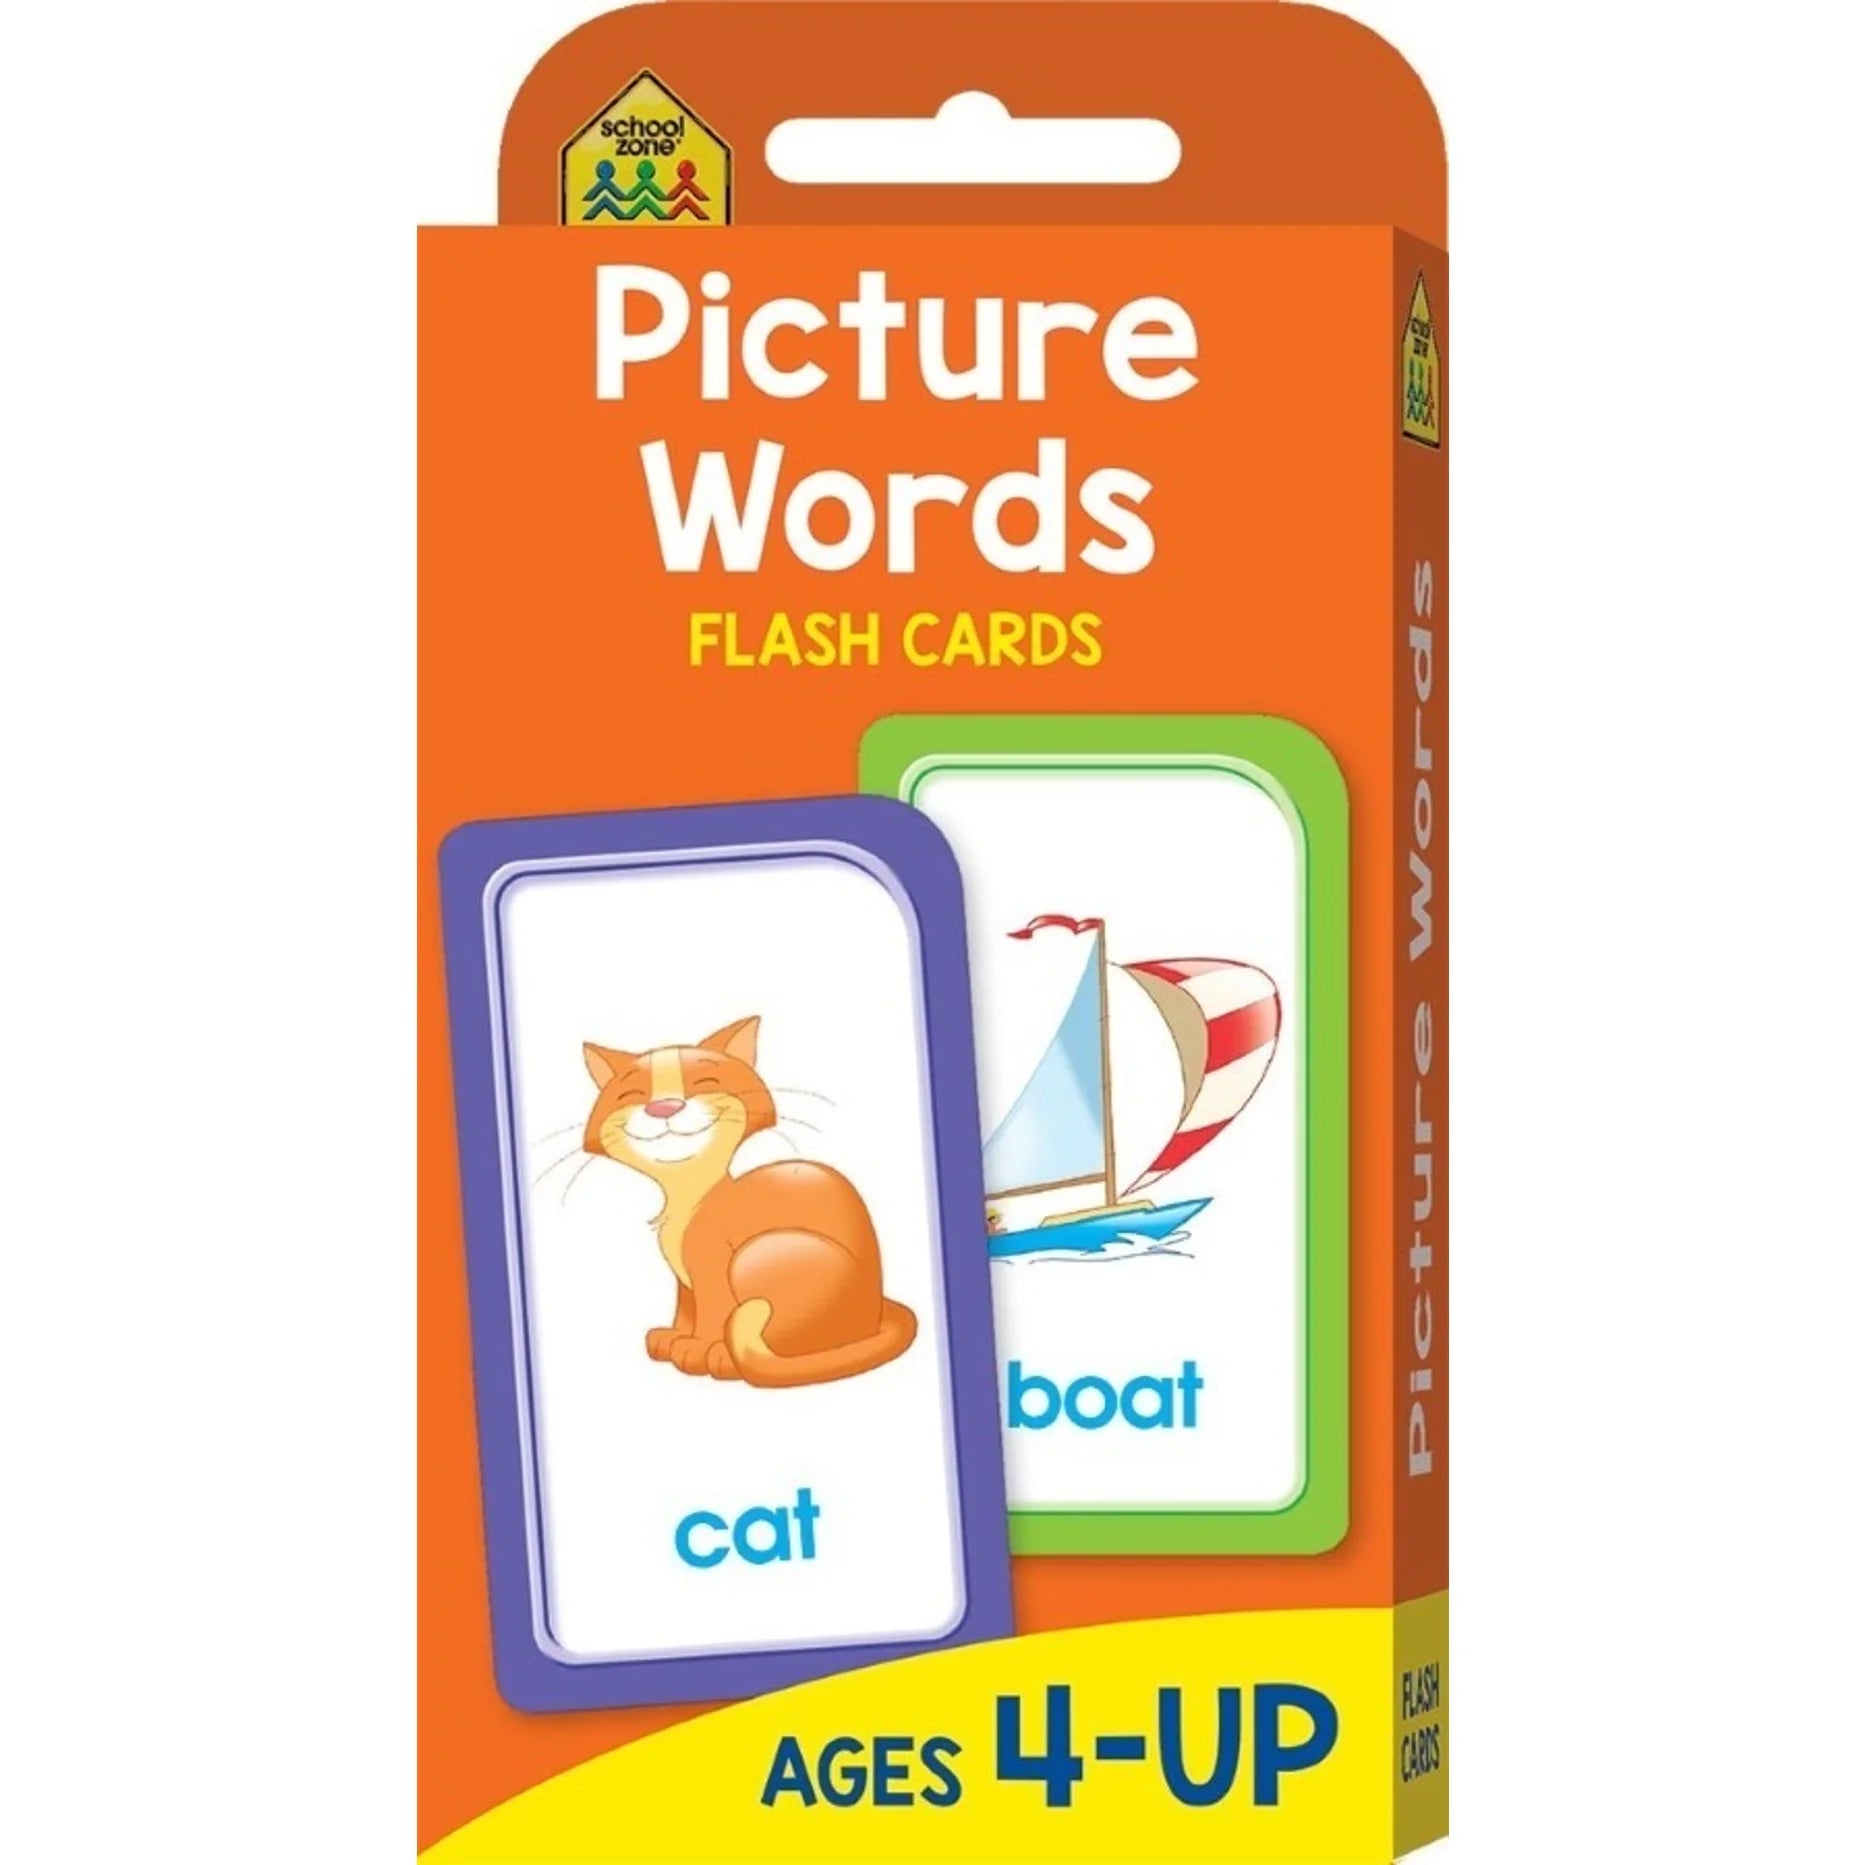 SZ Flash Cards Picture Words (6119114440903)